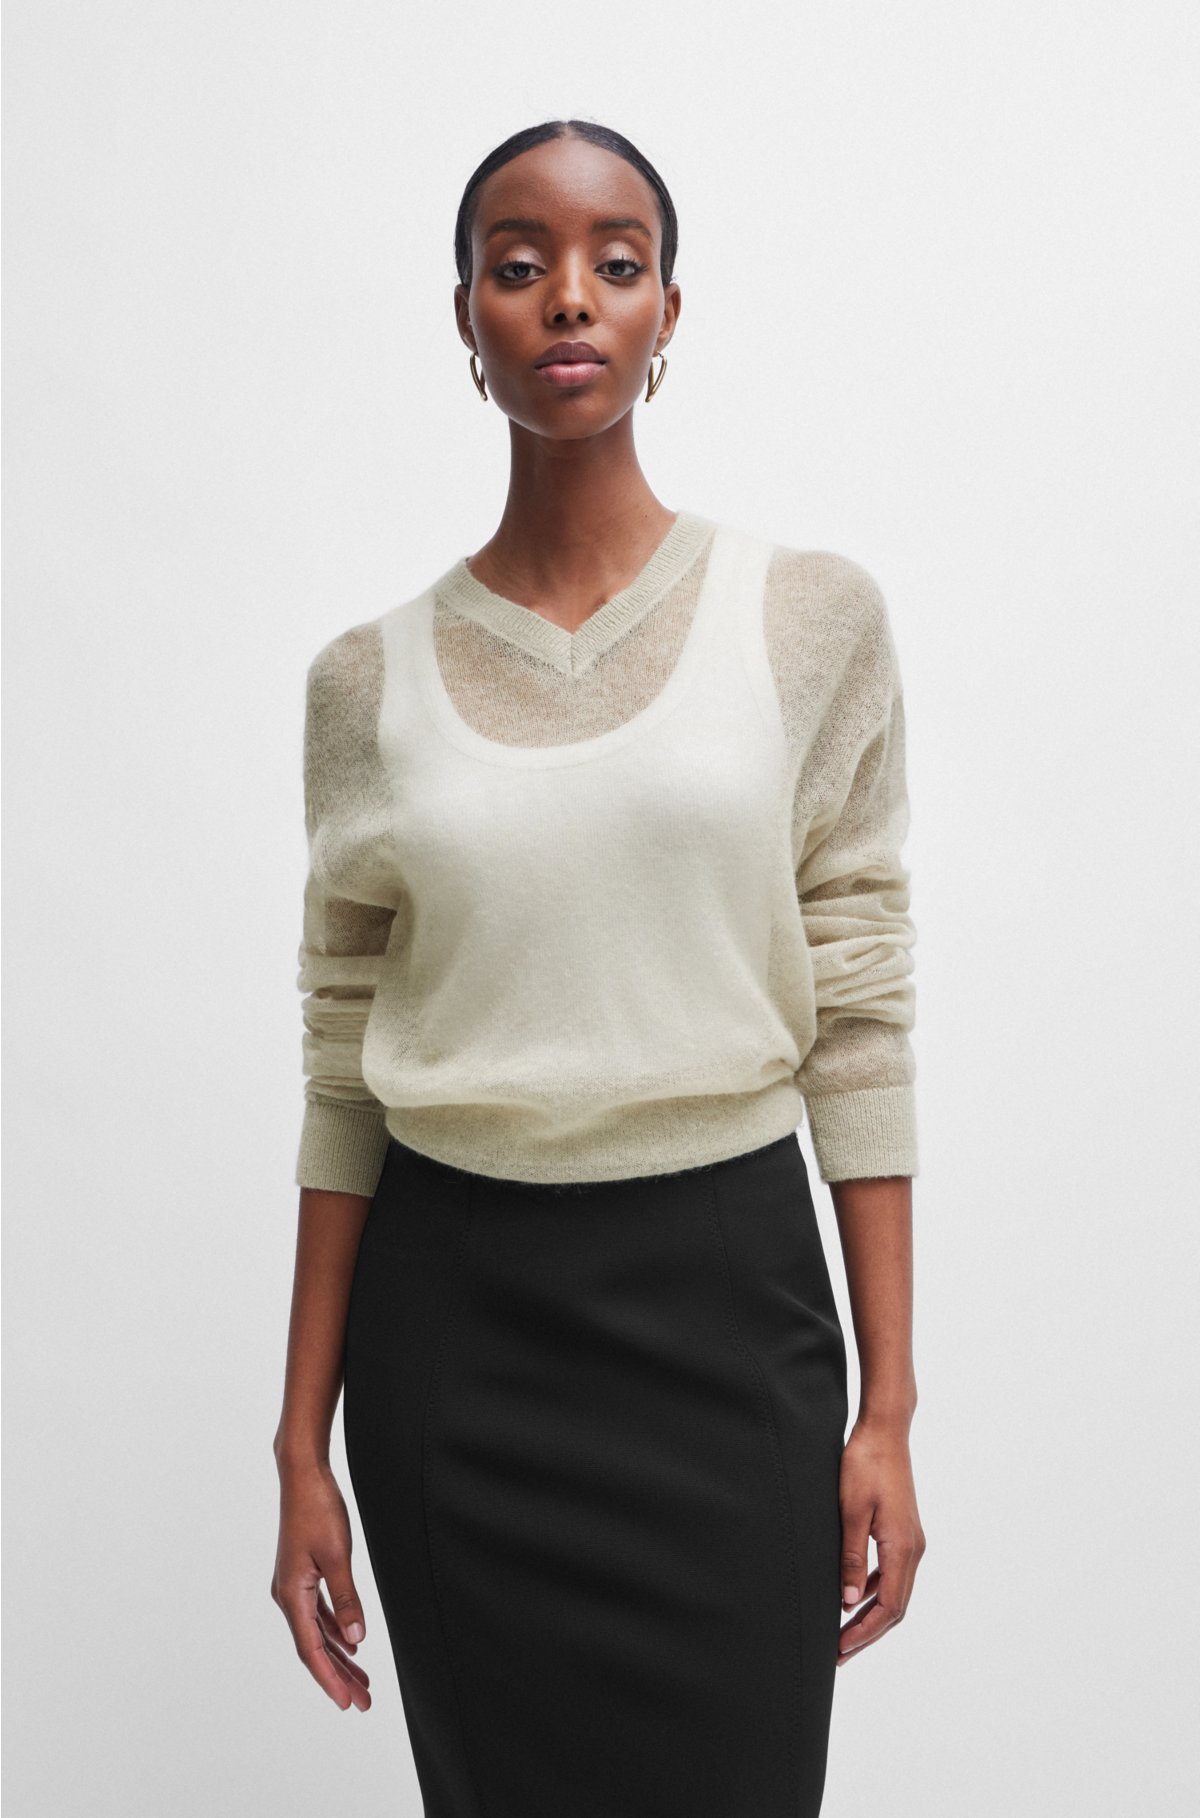 V-neck sweater in a sheer knit